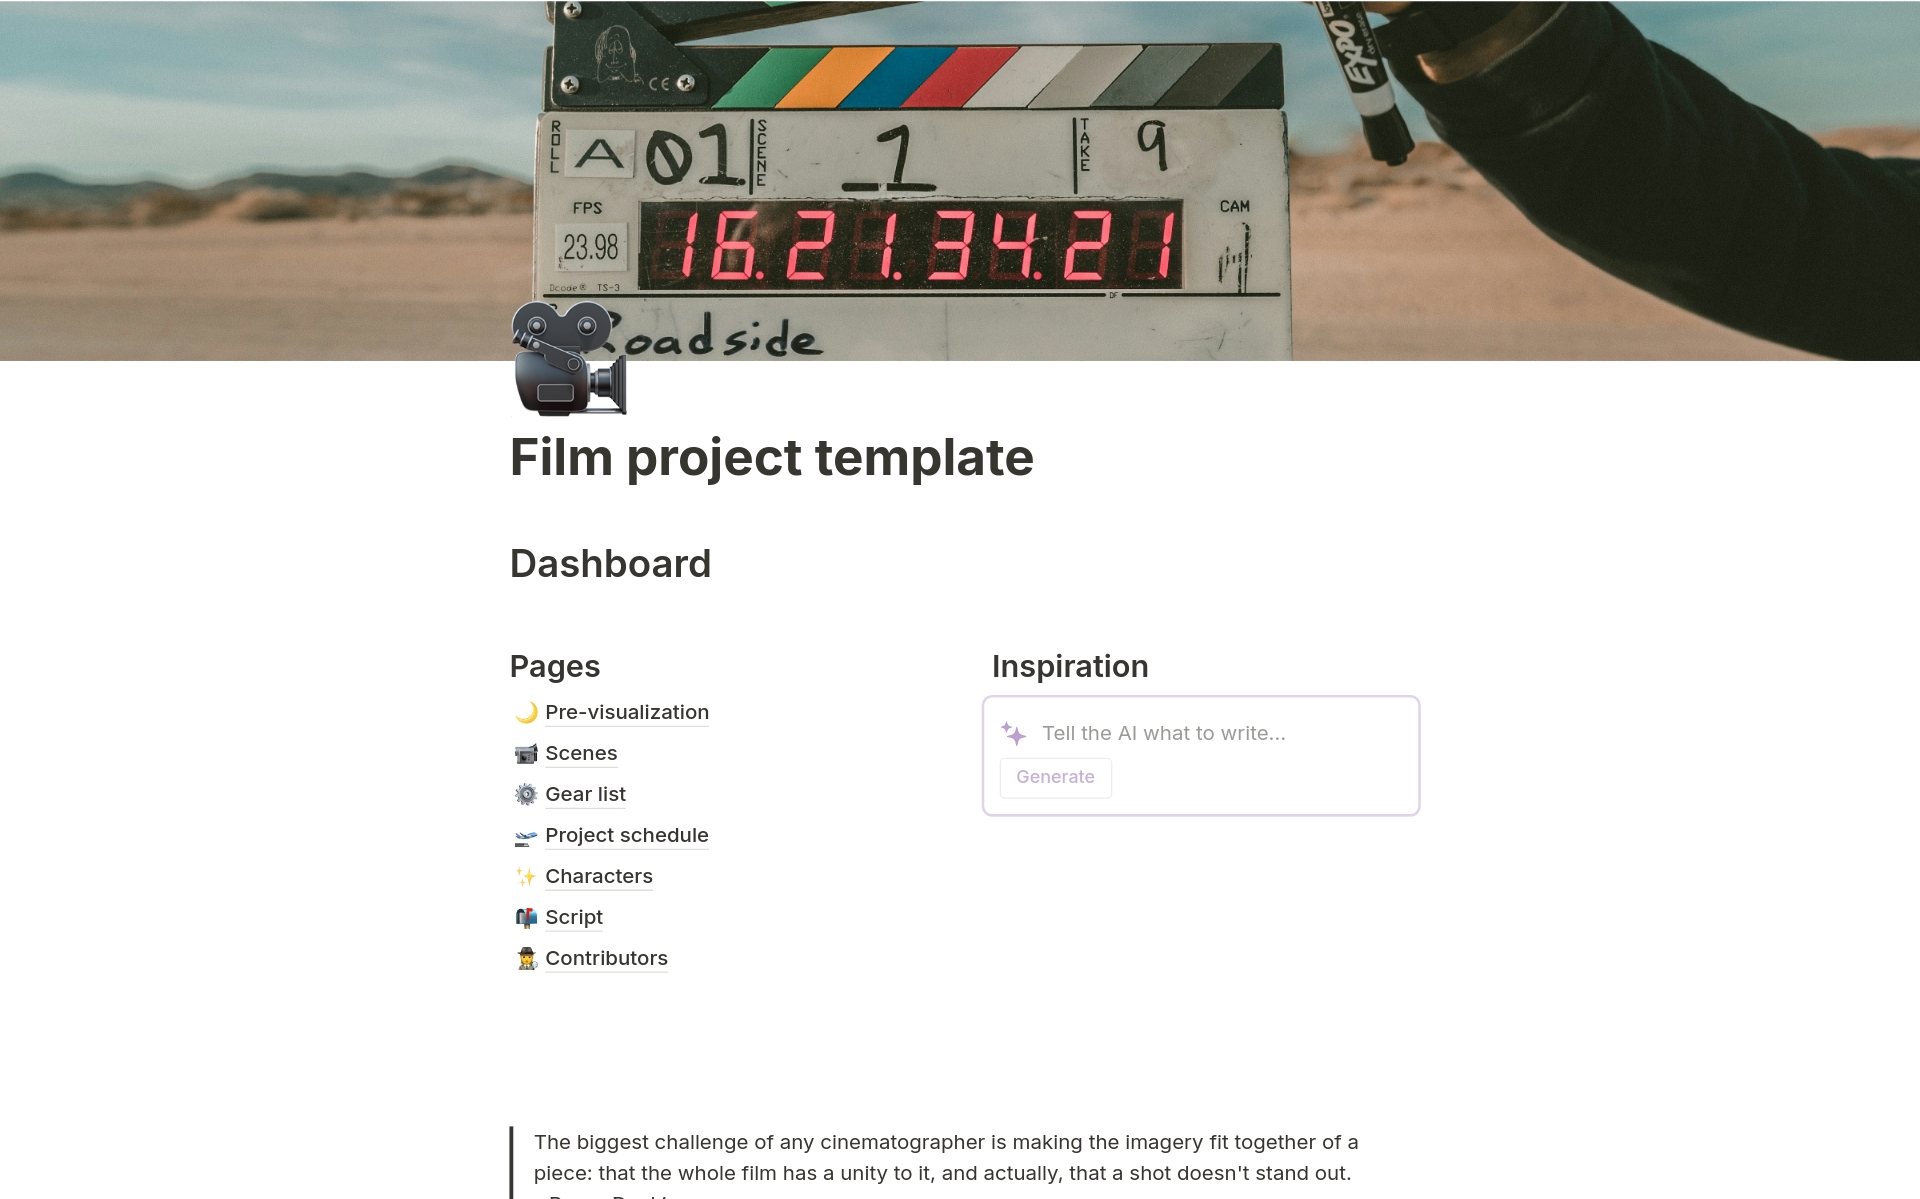 The movie project template is your go-to for every stage of film creation, whether it's a commercial, short film, or feature film. It's versatile, comprehensive, and ready for action!